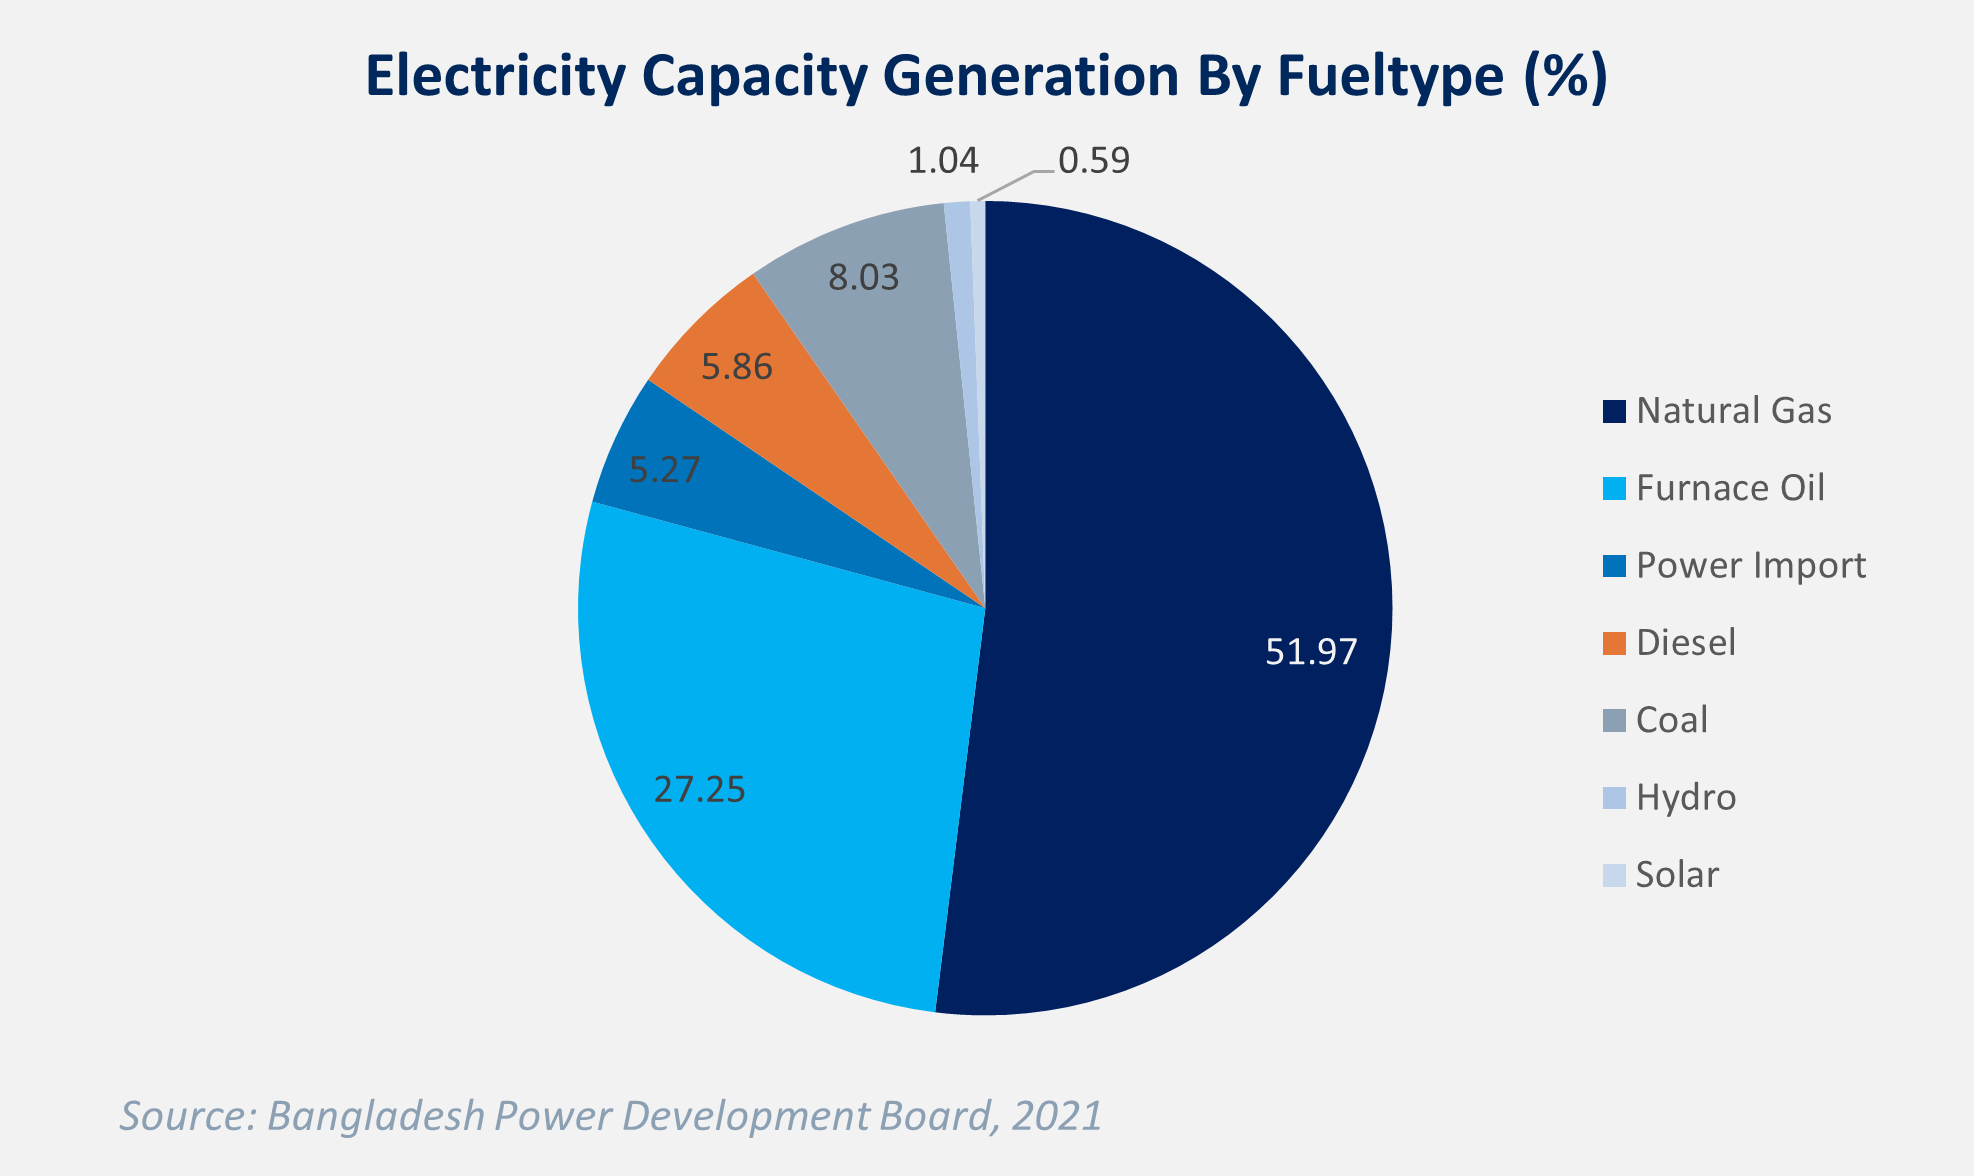 Electricity Generation Capacity by Fuel Type in Bangladesh